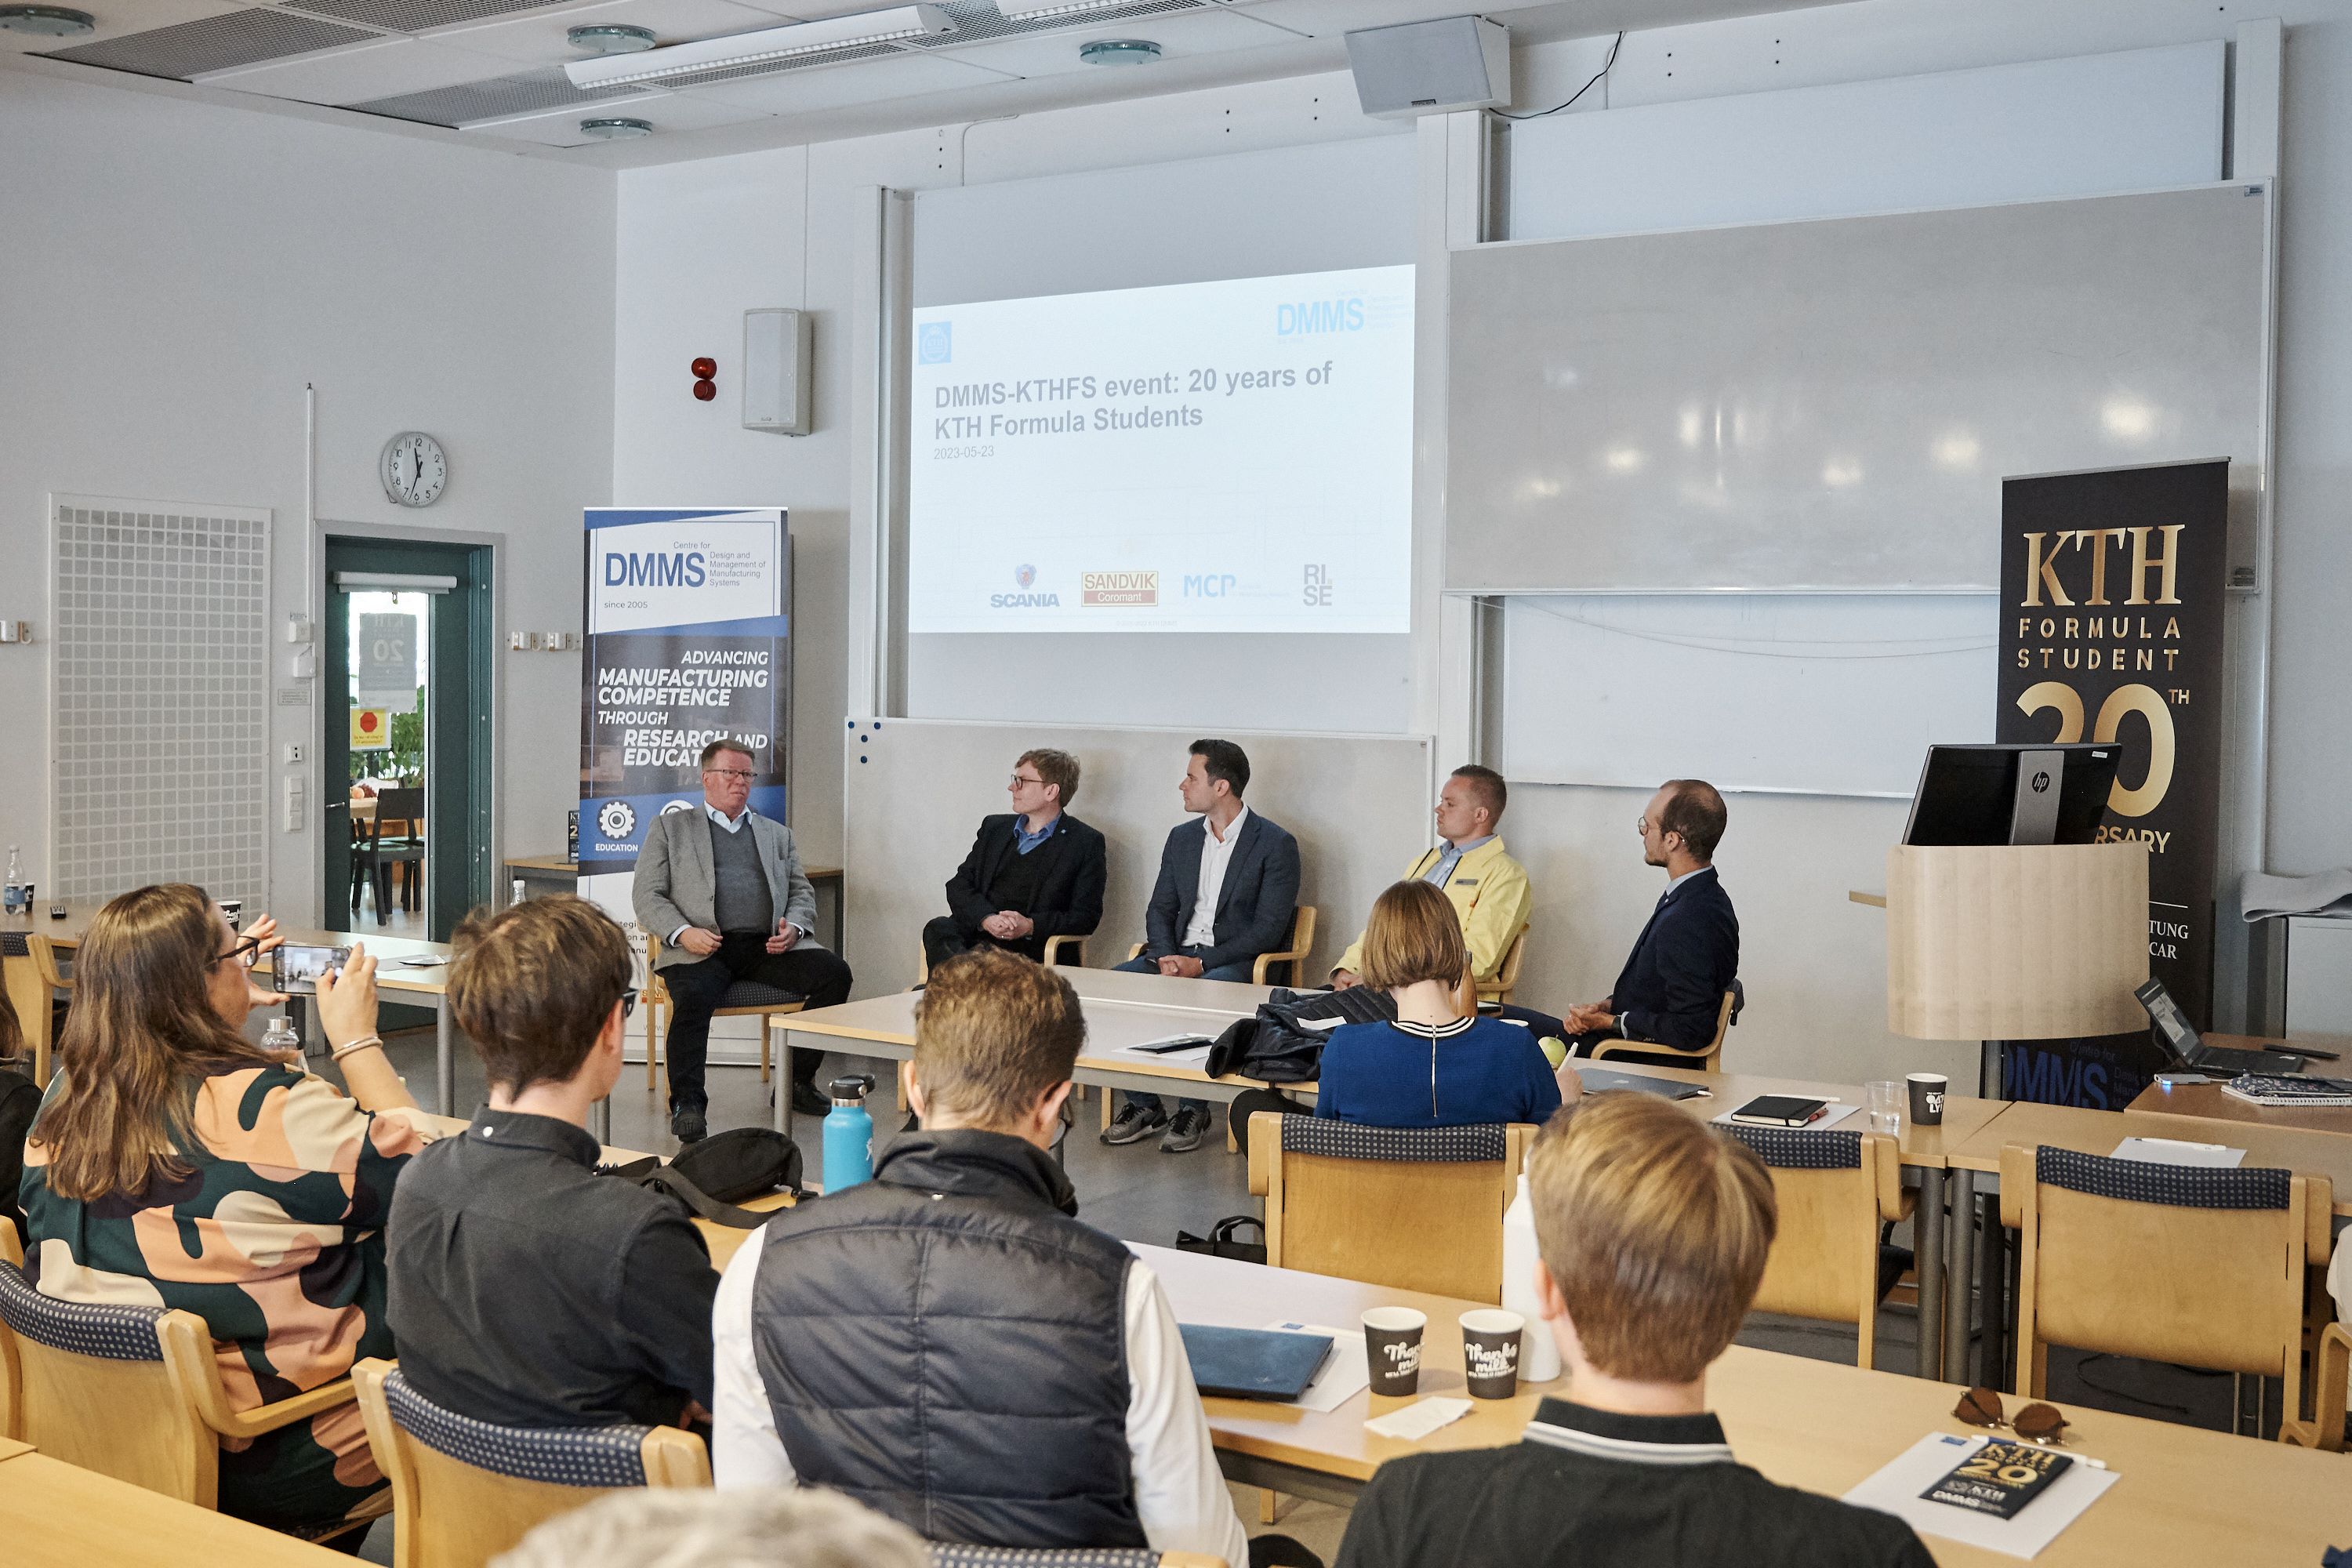 Representatives from industry, research and academia talked important topics at a panel discussion